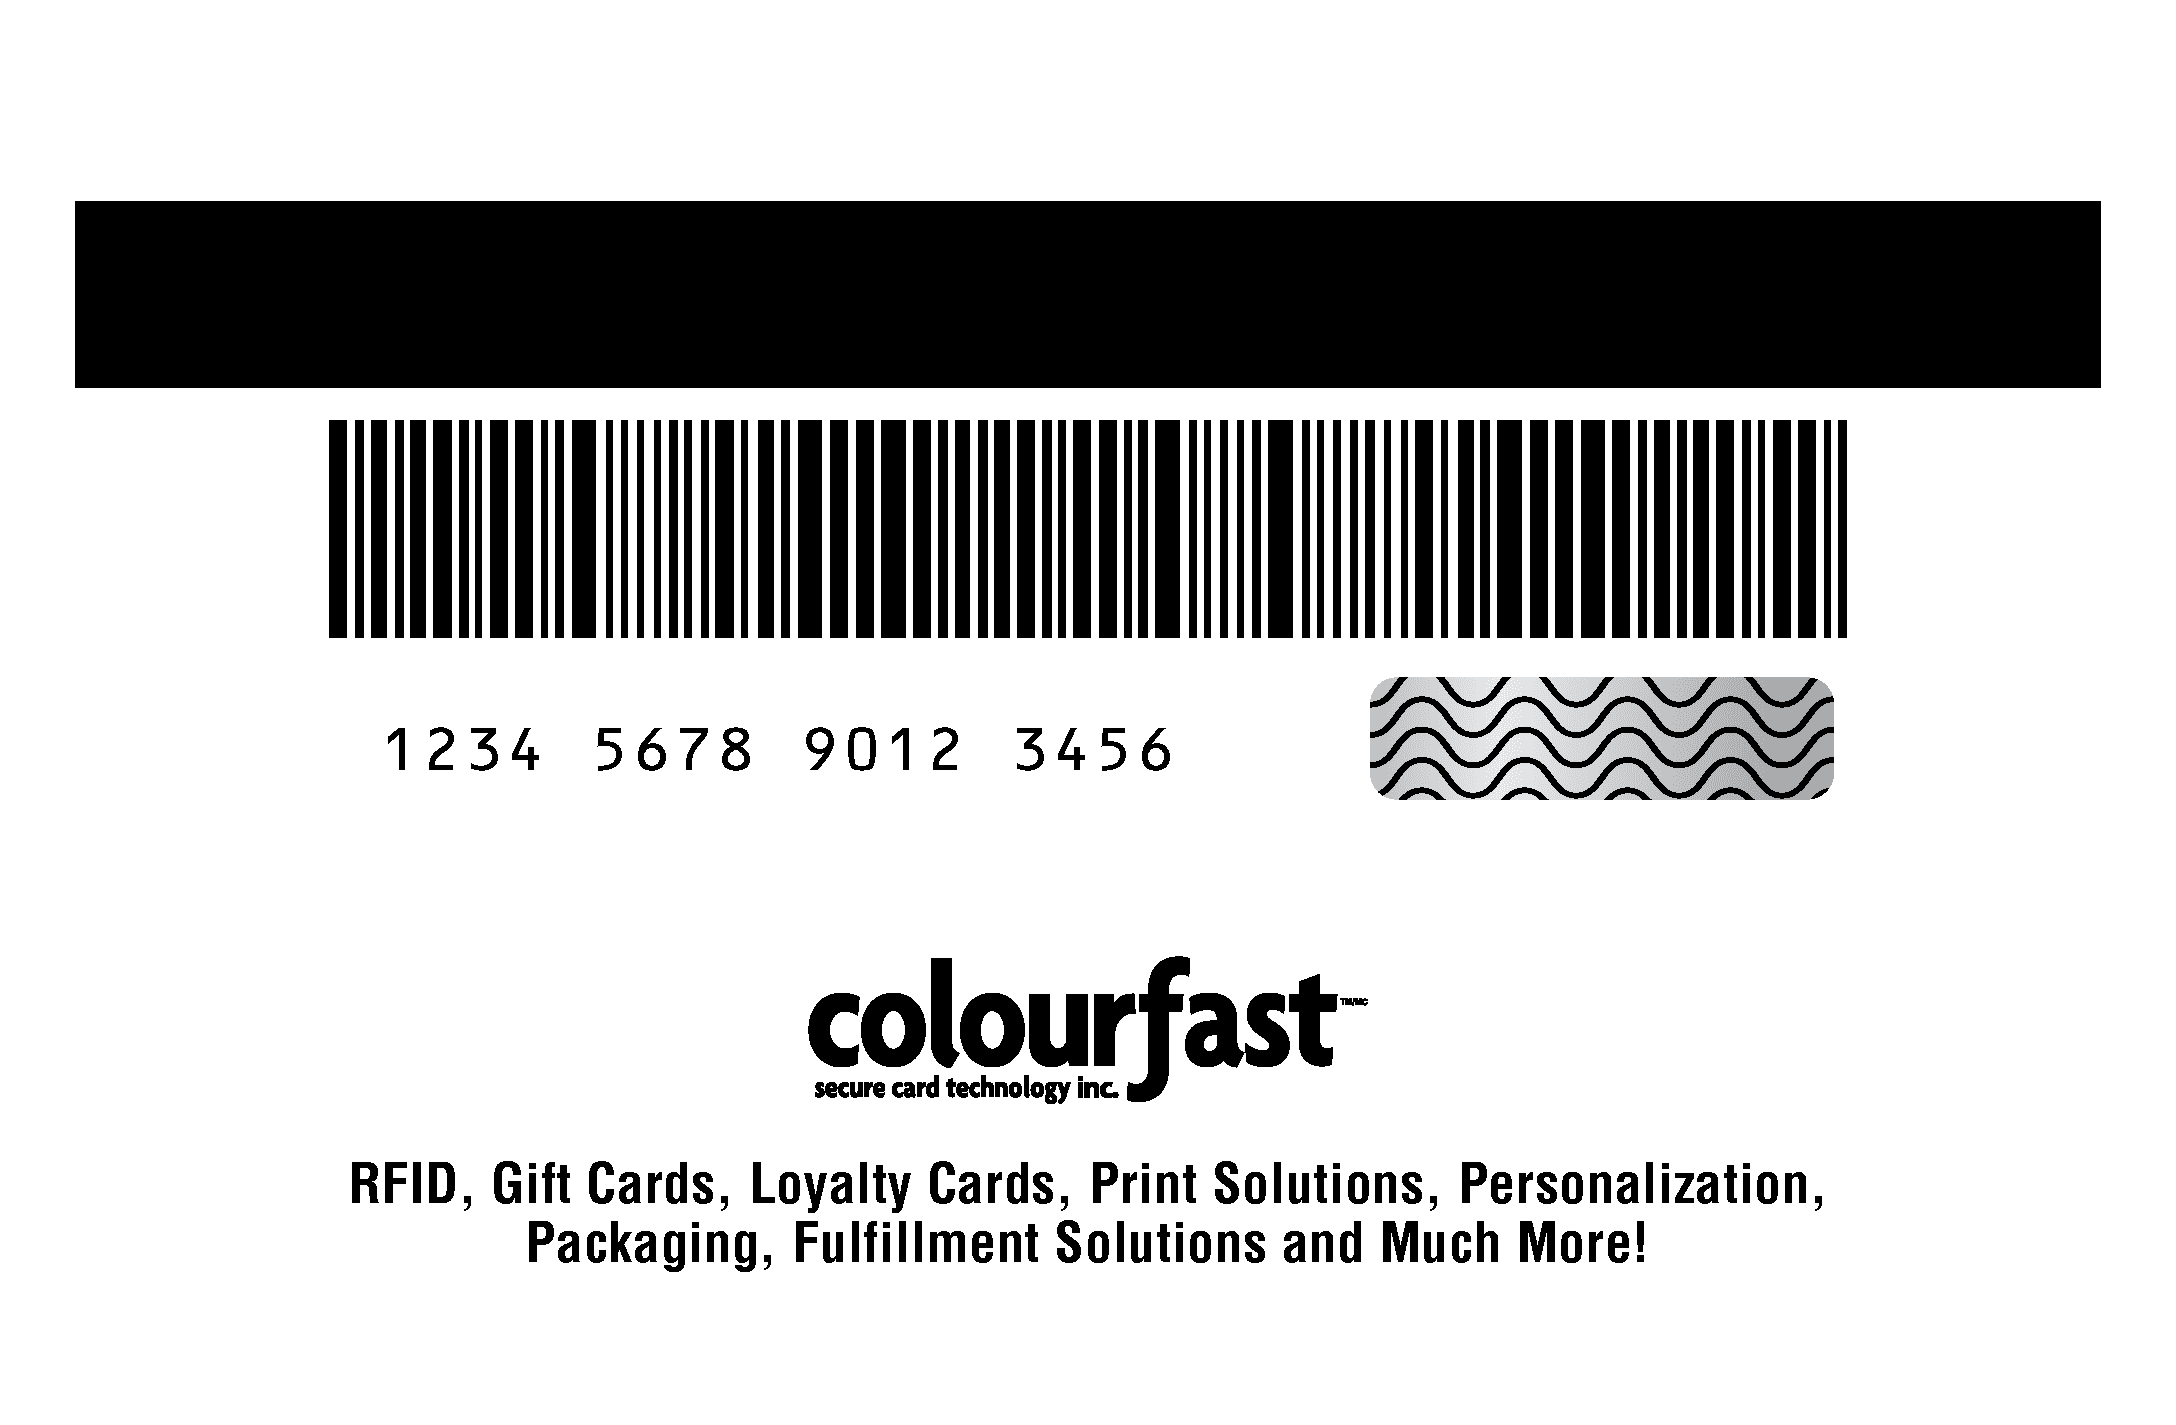 Image of Magnetic Stripe, Variable Barcode, Human-readable number, Scratch Off Panel